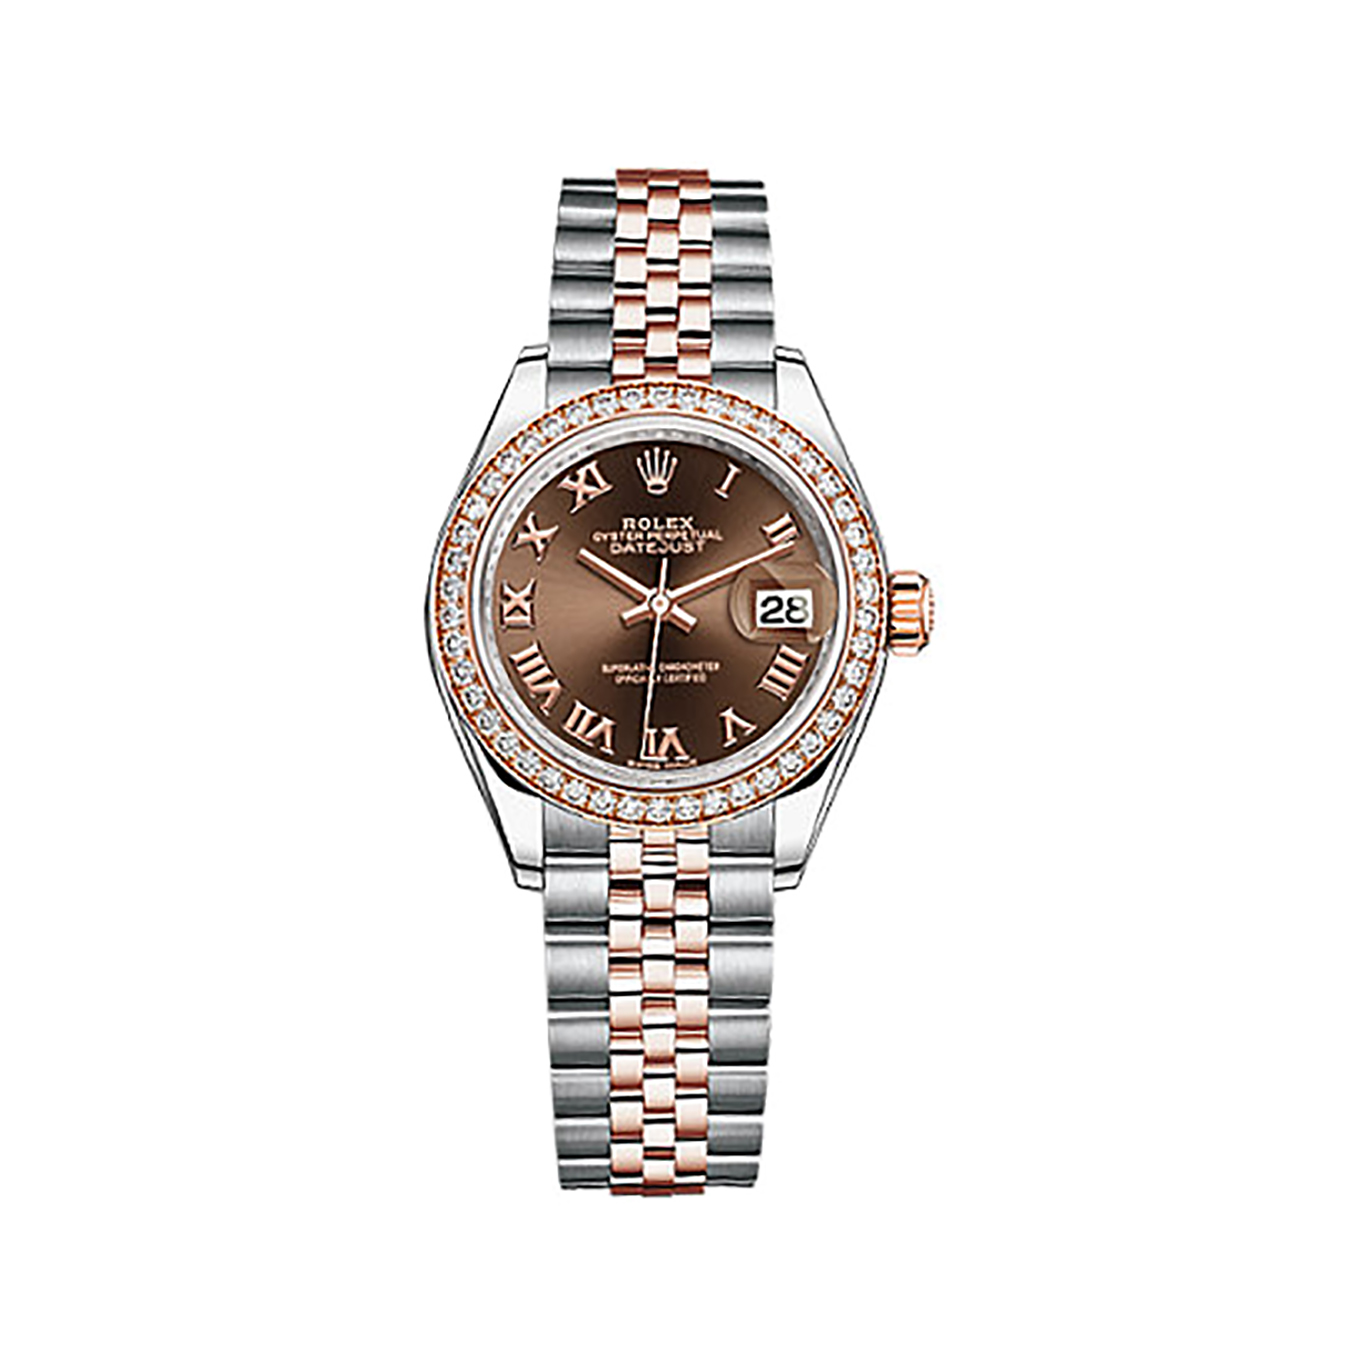 Lady-Datejust 28 279381RBR Rose Gold & Stainless Steel & Diamonds Watch (Chocolate)